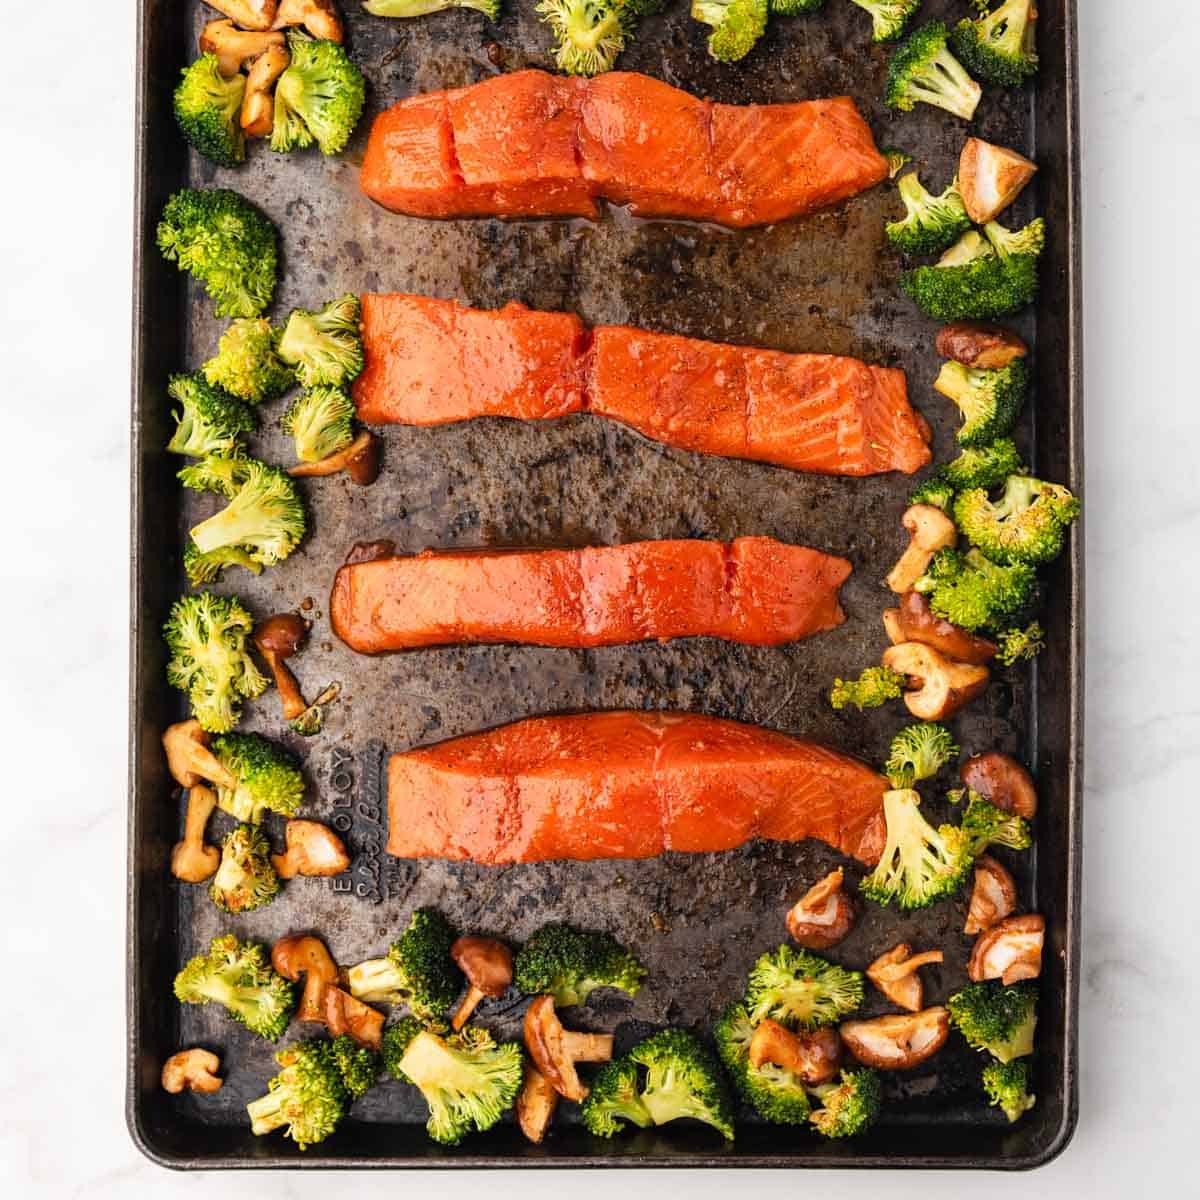 Salmon fillets on dark baking sheet surrounded by shiitake mushrooms and broccoli